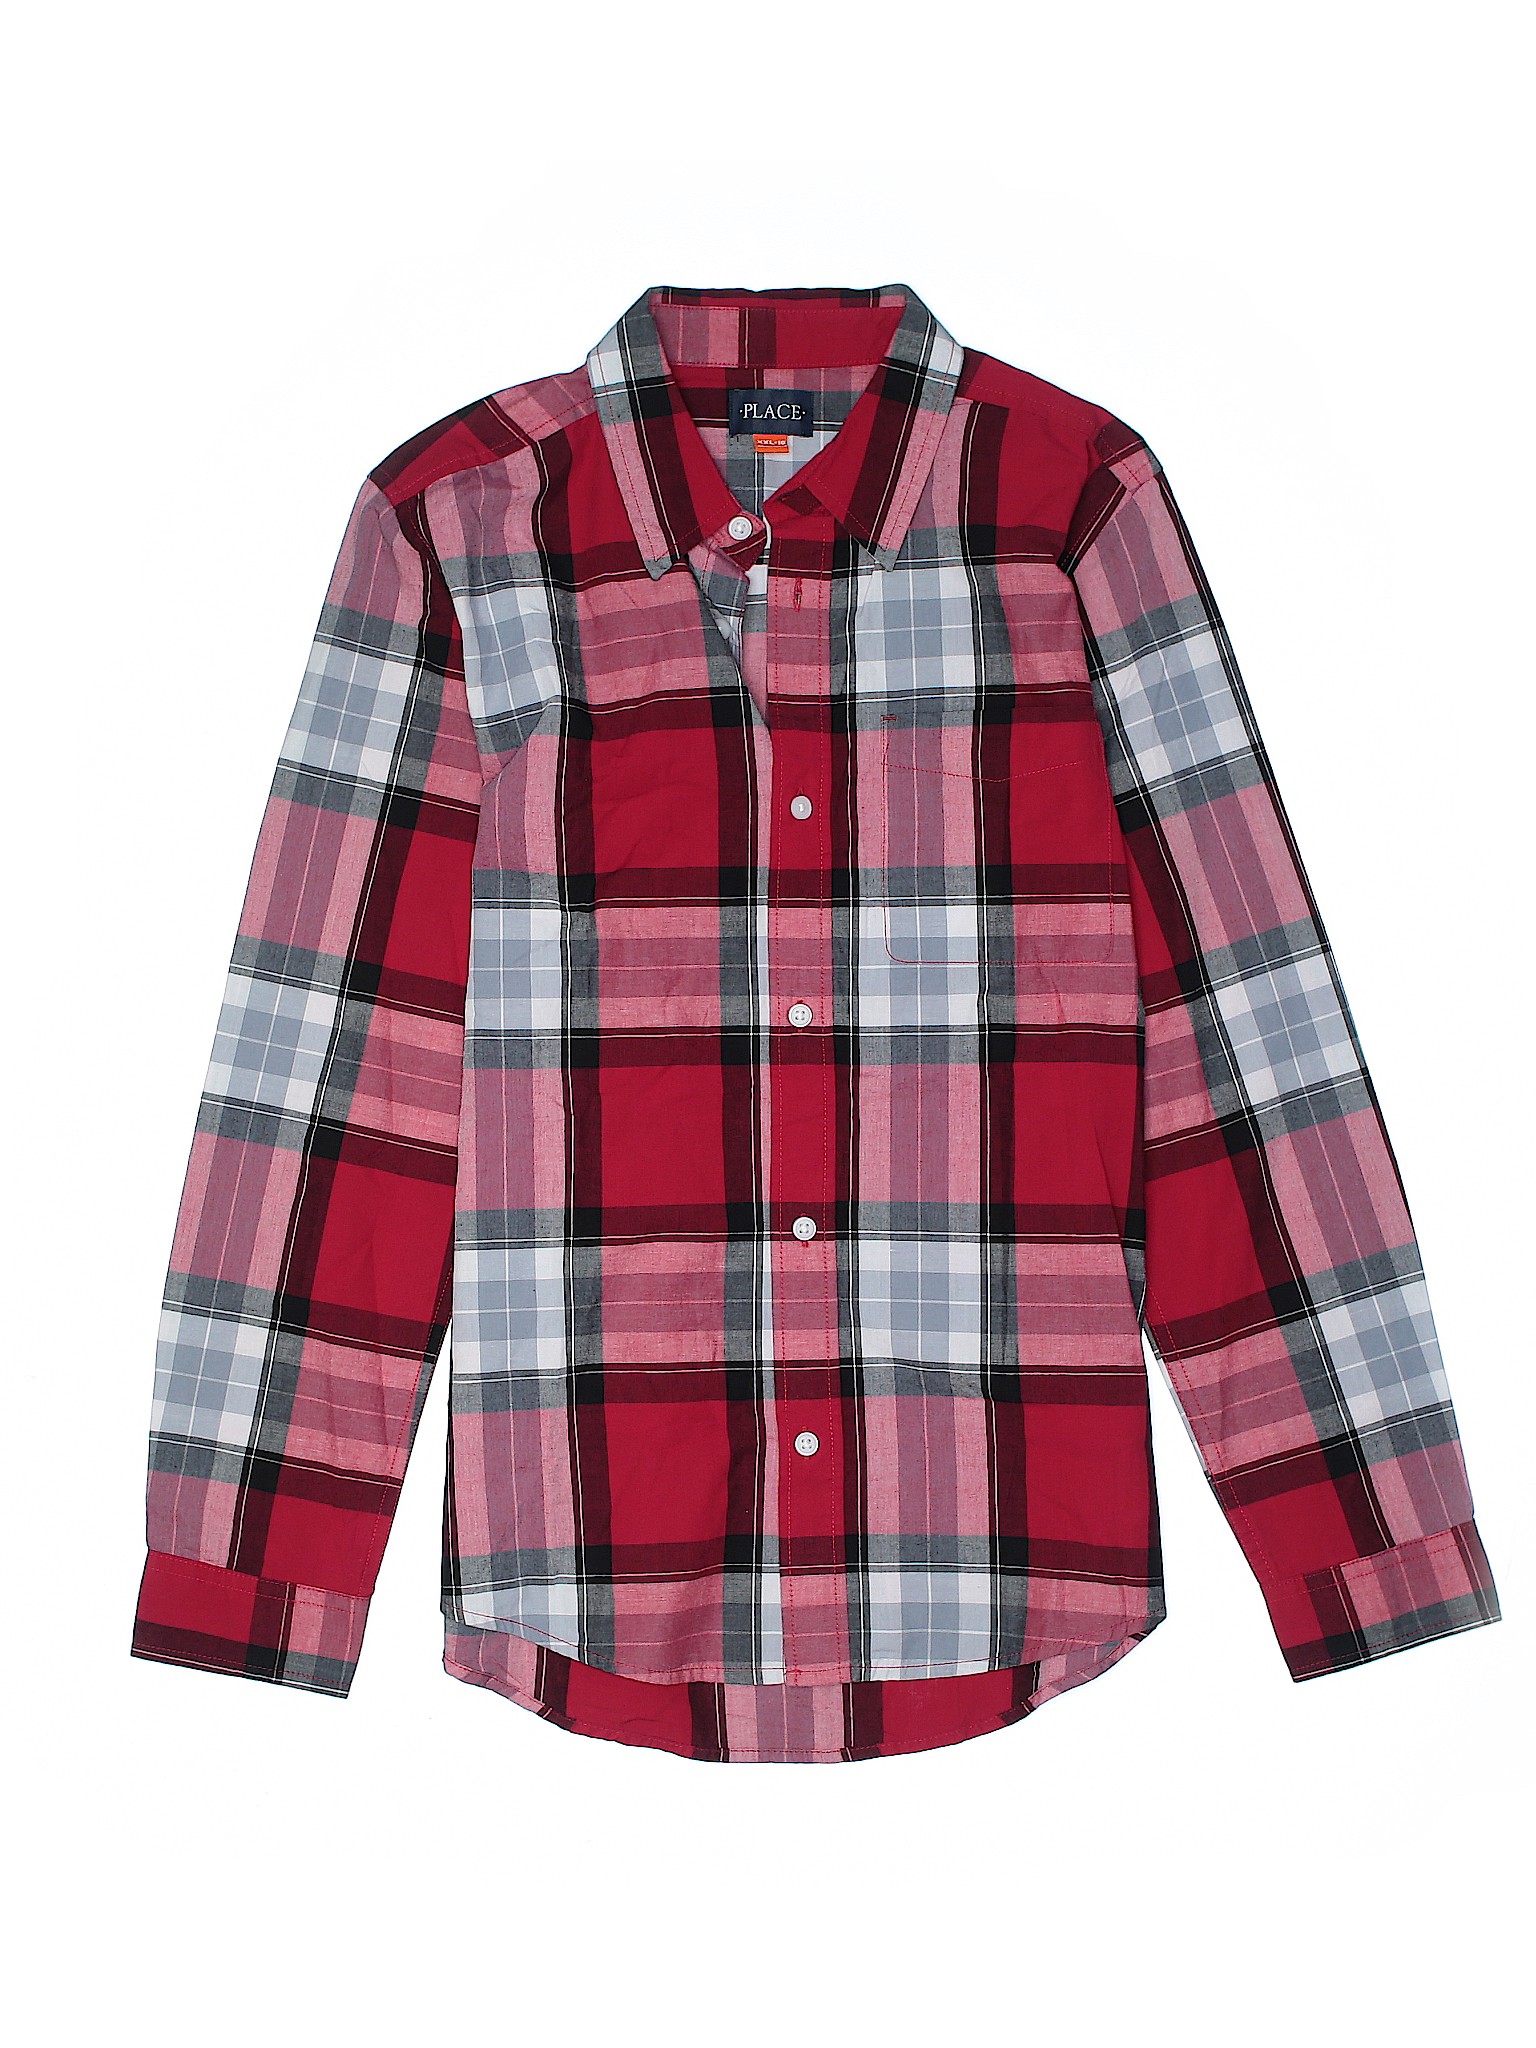 The Children's Place Boys Red Long Sleeve Button-Down Shirt 16 | eBay